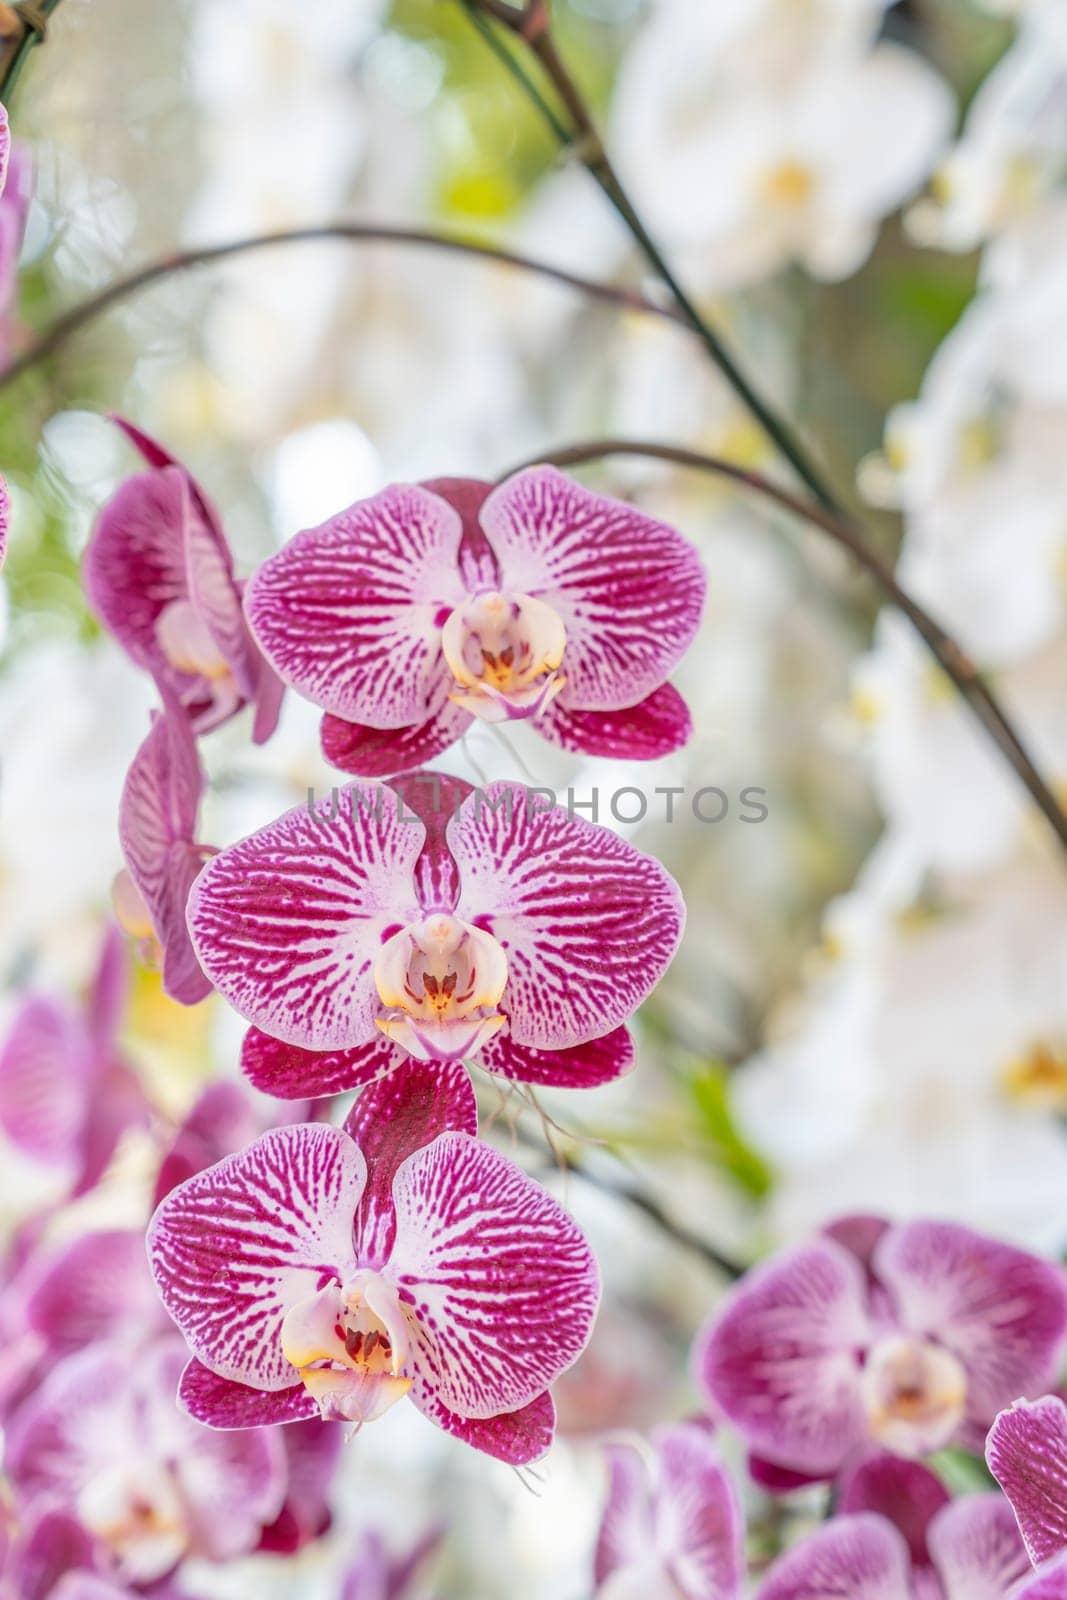 The pink and white moon orchids. Also known as a moth orchid. Botanical name: Phalaenopsis Aphrodite by Gamjai